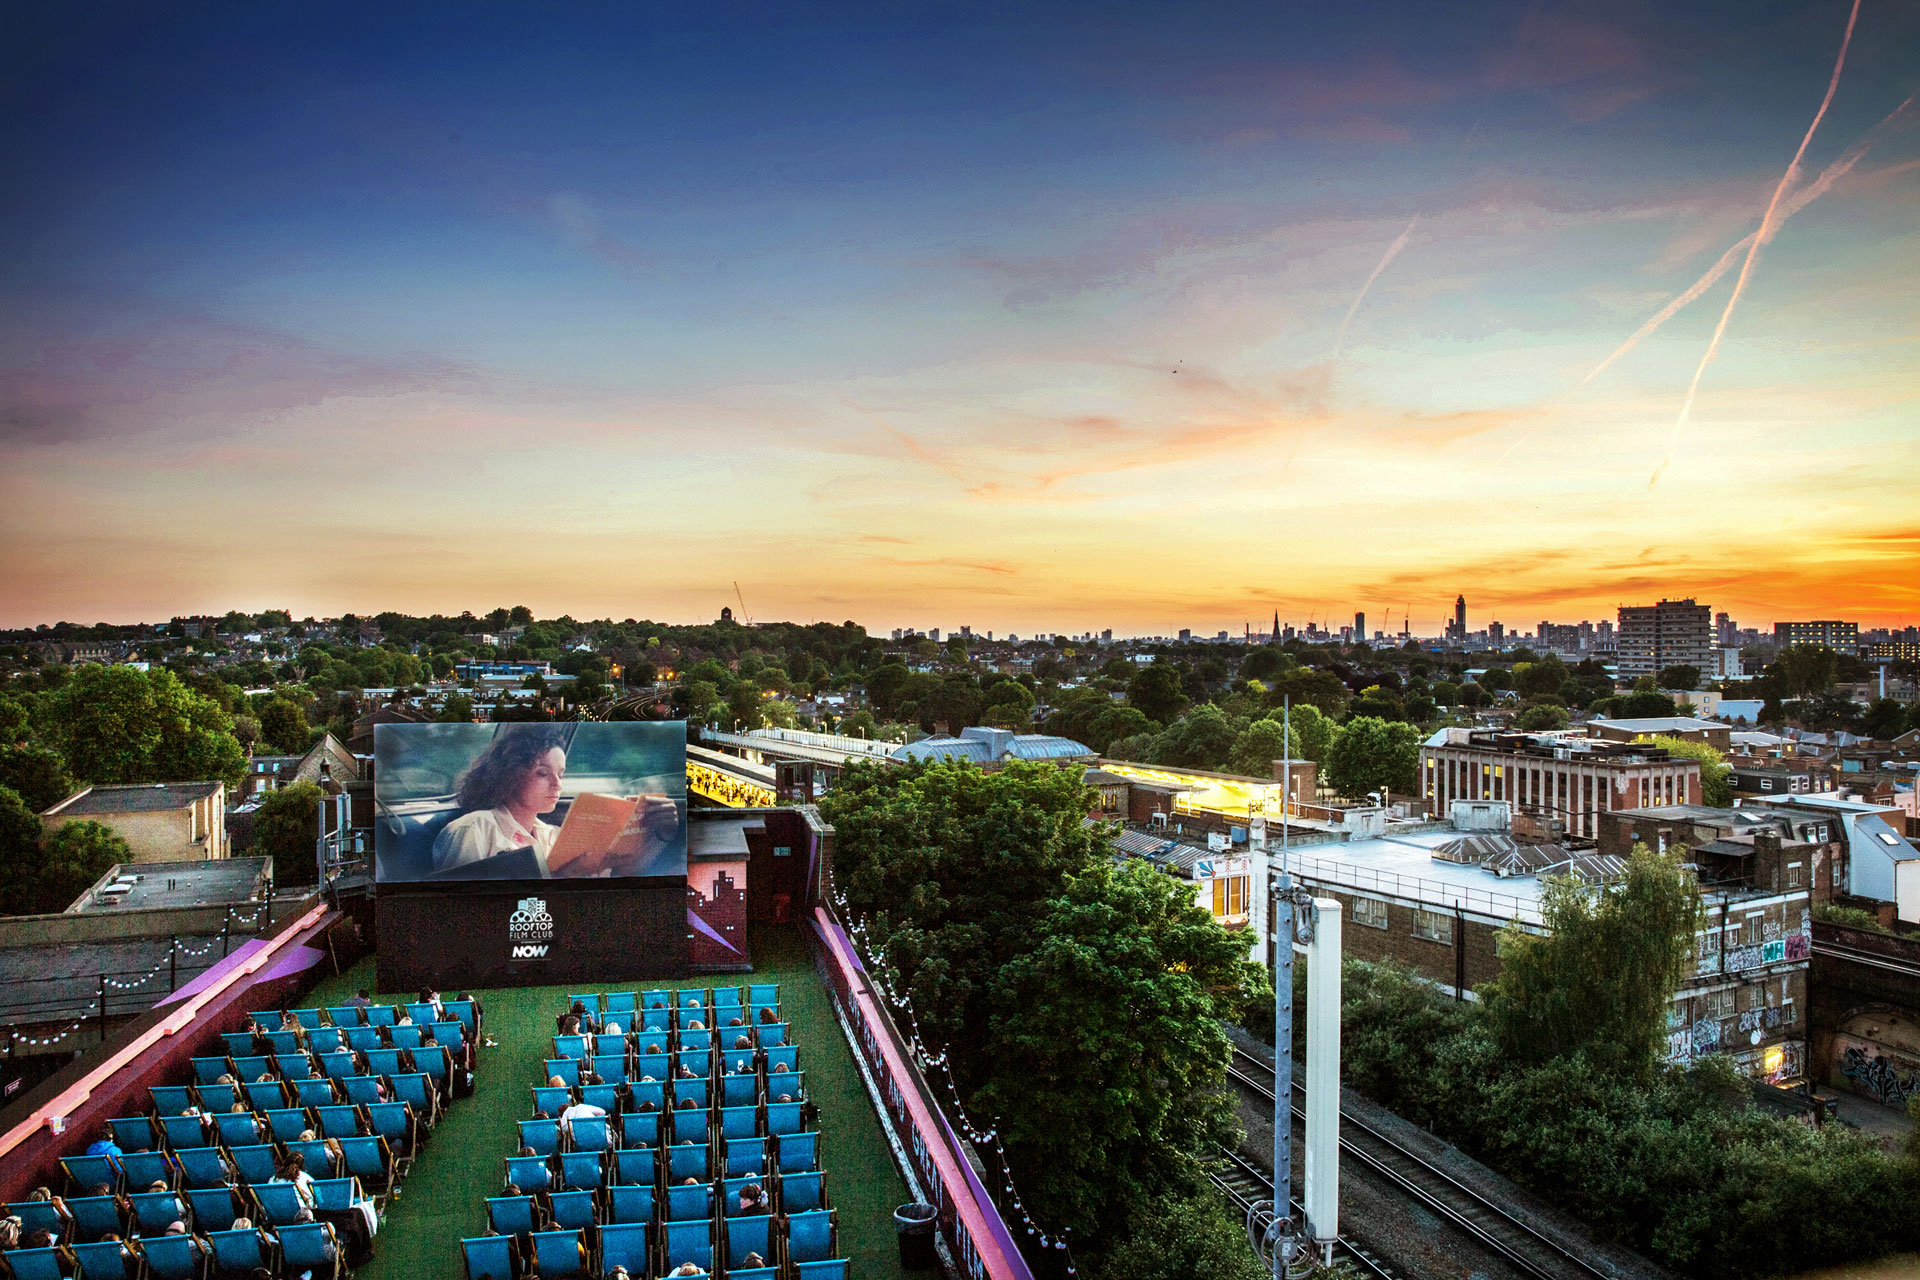 Rooftop film club Bussey Building